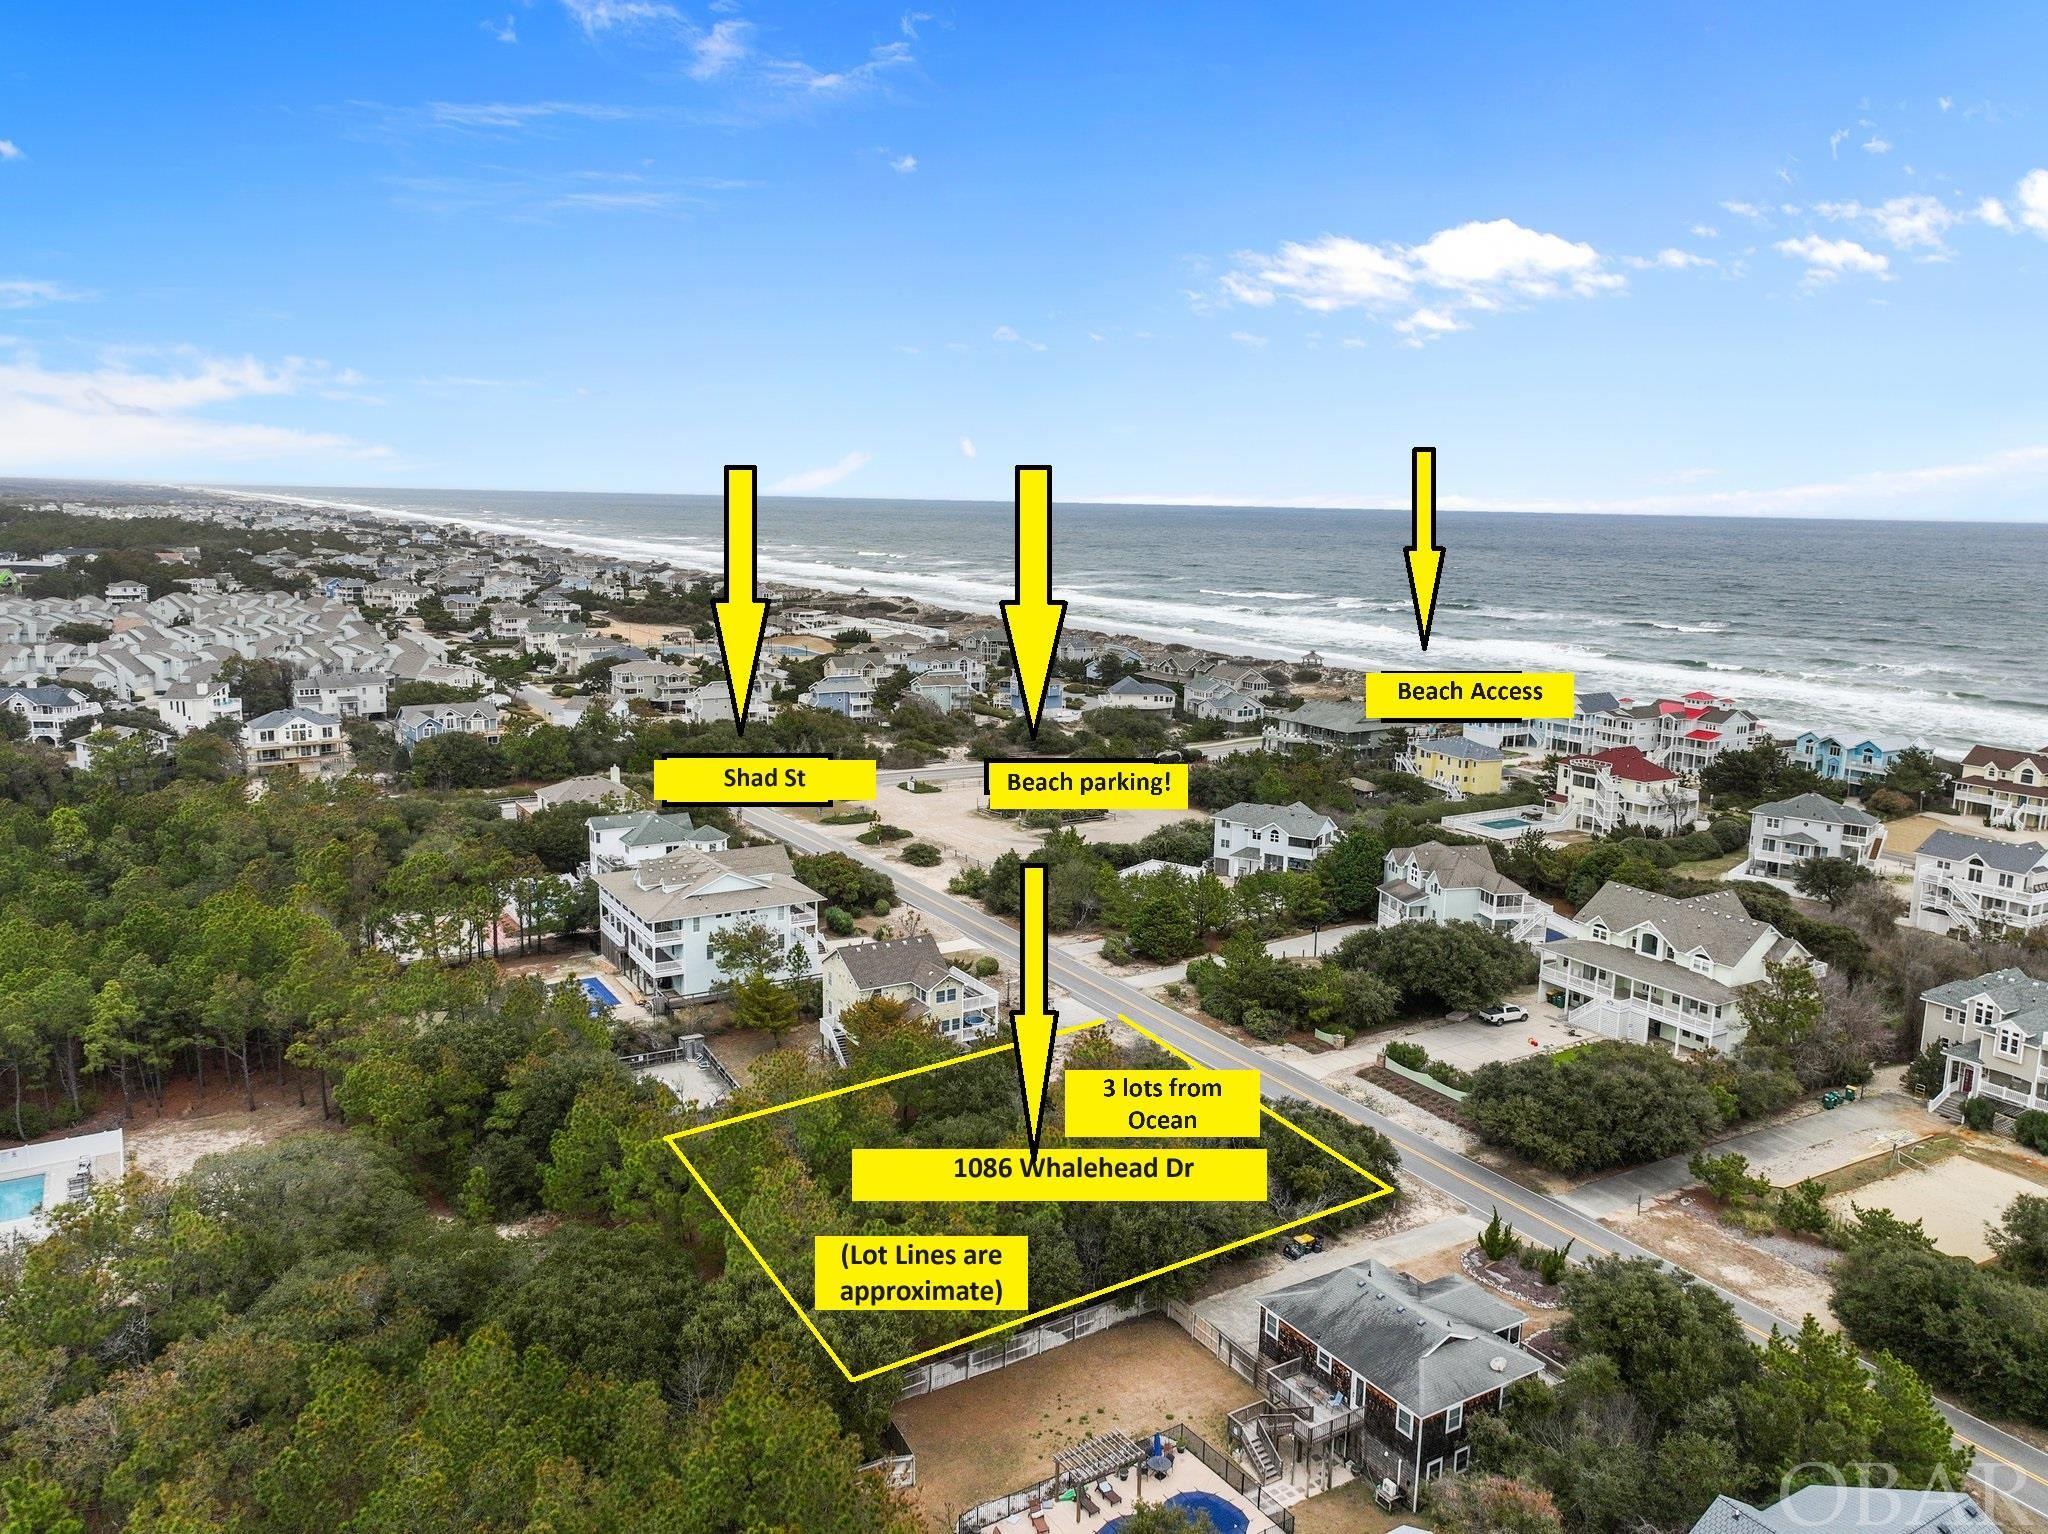 JUST 3 LOTS TO OCEAN AND NEAR SHAD ST! THE ONLY LOT CURRENTLY FOR SALE IN WHALEHEAD.   This lot is close to Shad St Beach Access with Plenty of Parking!  ACT TODAY BEFORE IT IS SOLD!